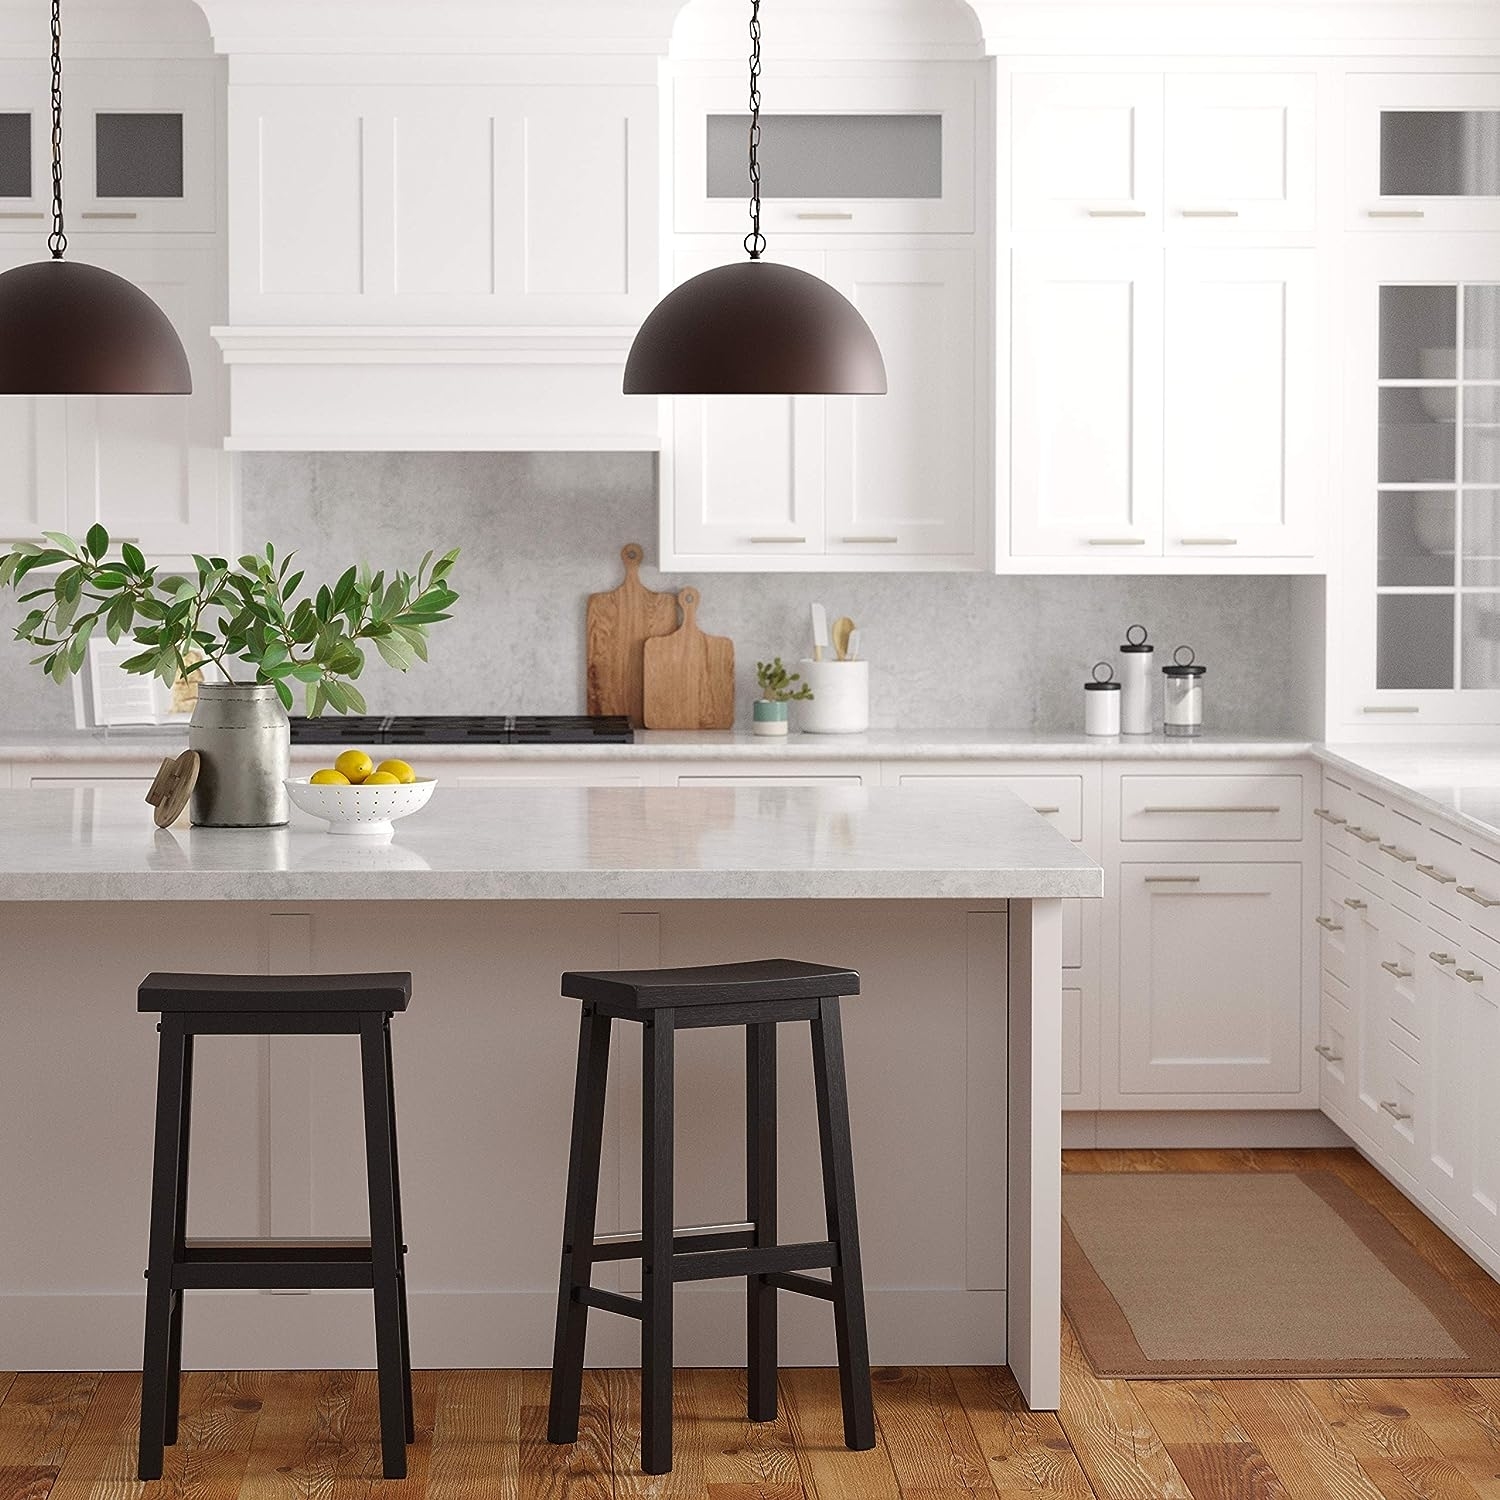 Two black wood barstools at a kitchen counter